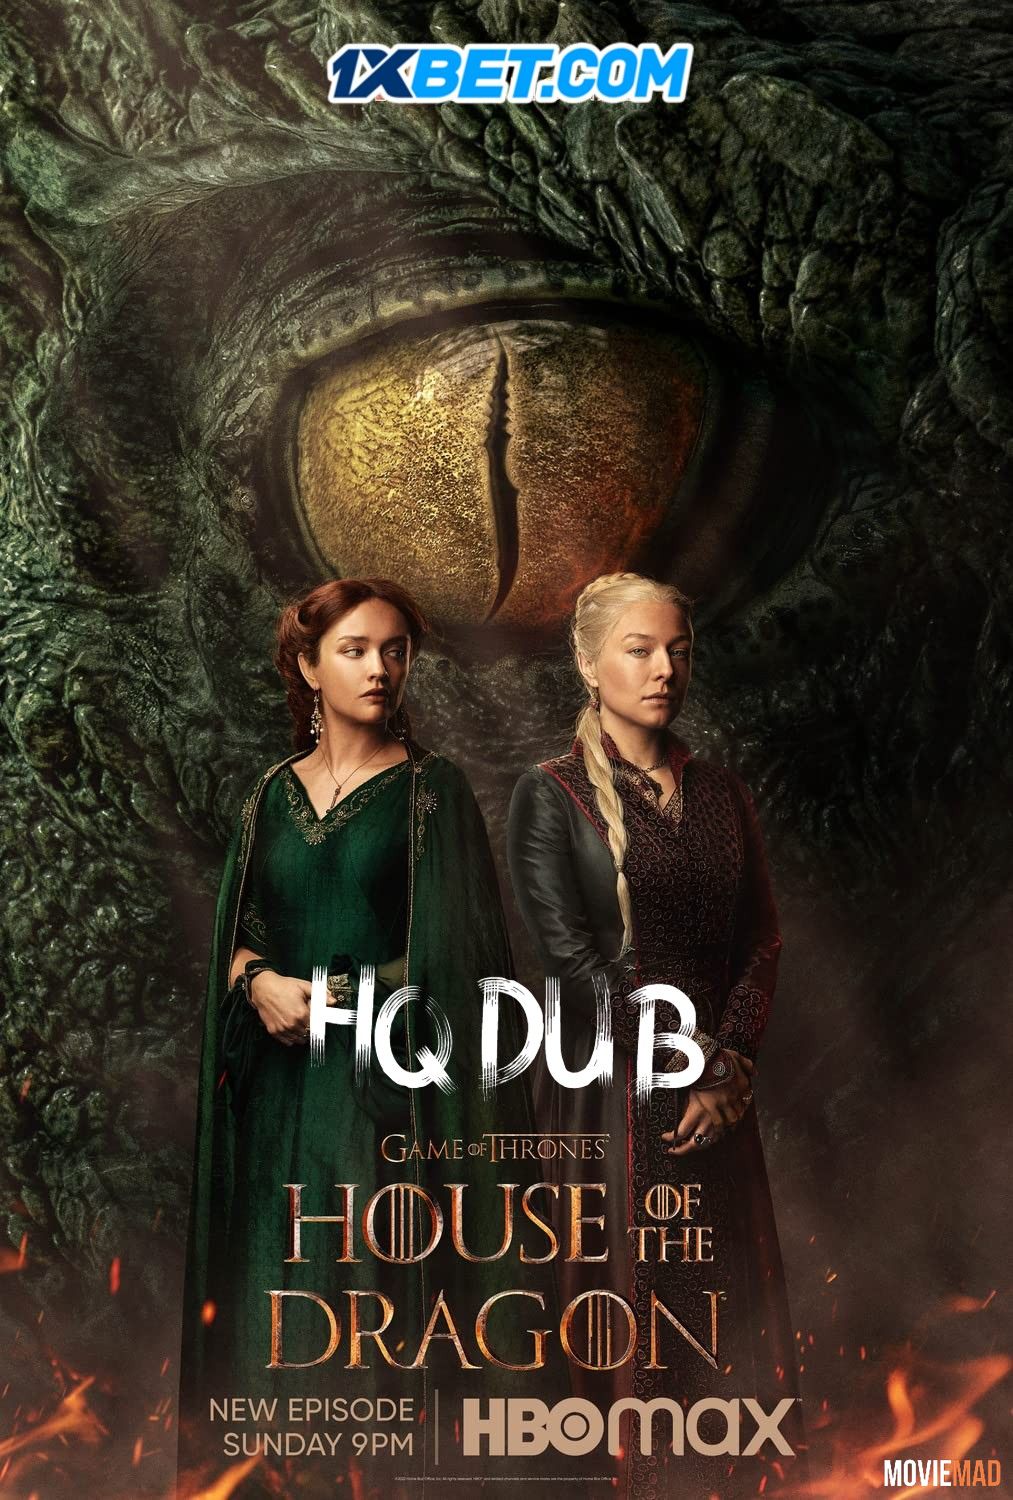 House Of The Dragon S01E07 (2022) Hindi (Voice Over) Dubbed HBOMAX HDRip 1080p 720p 480p Movie download